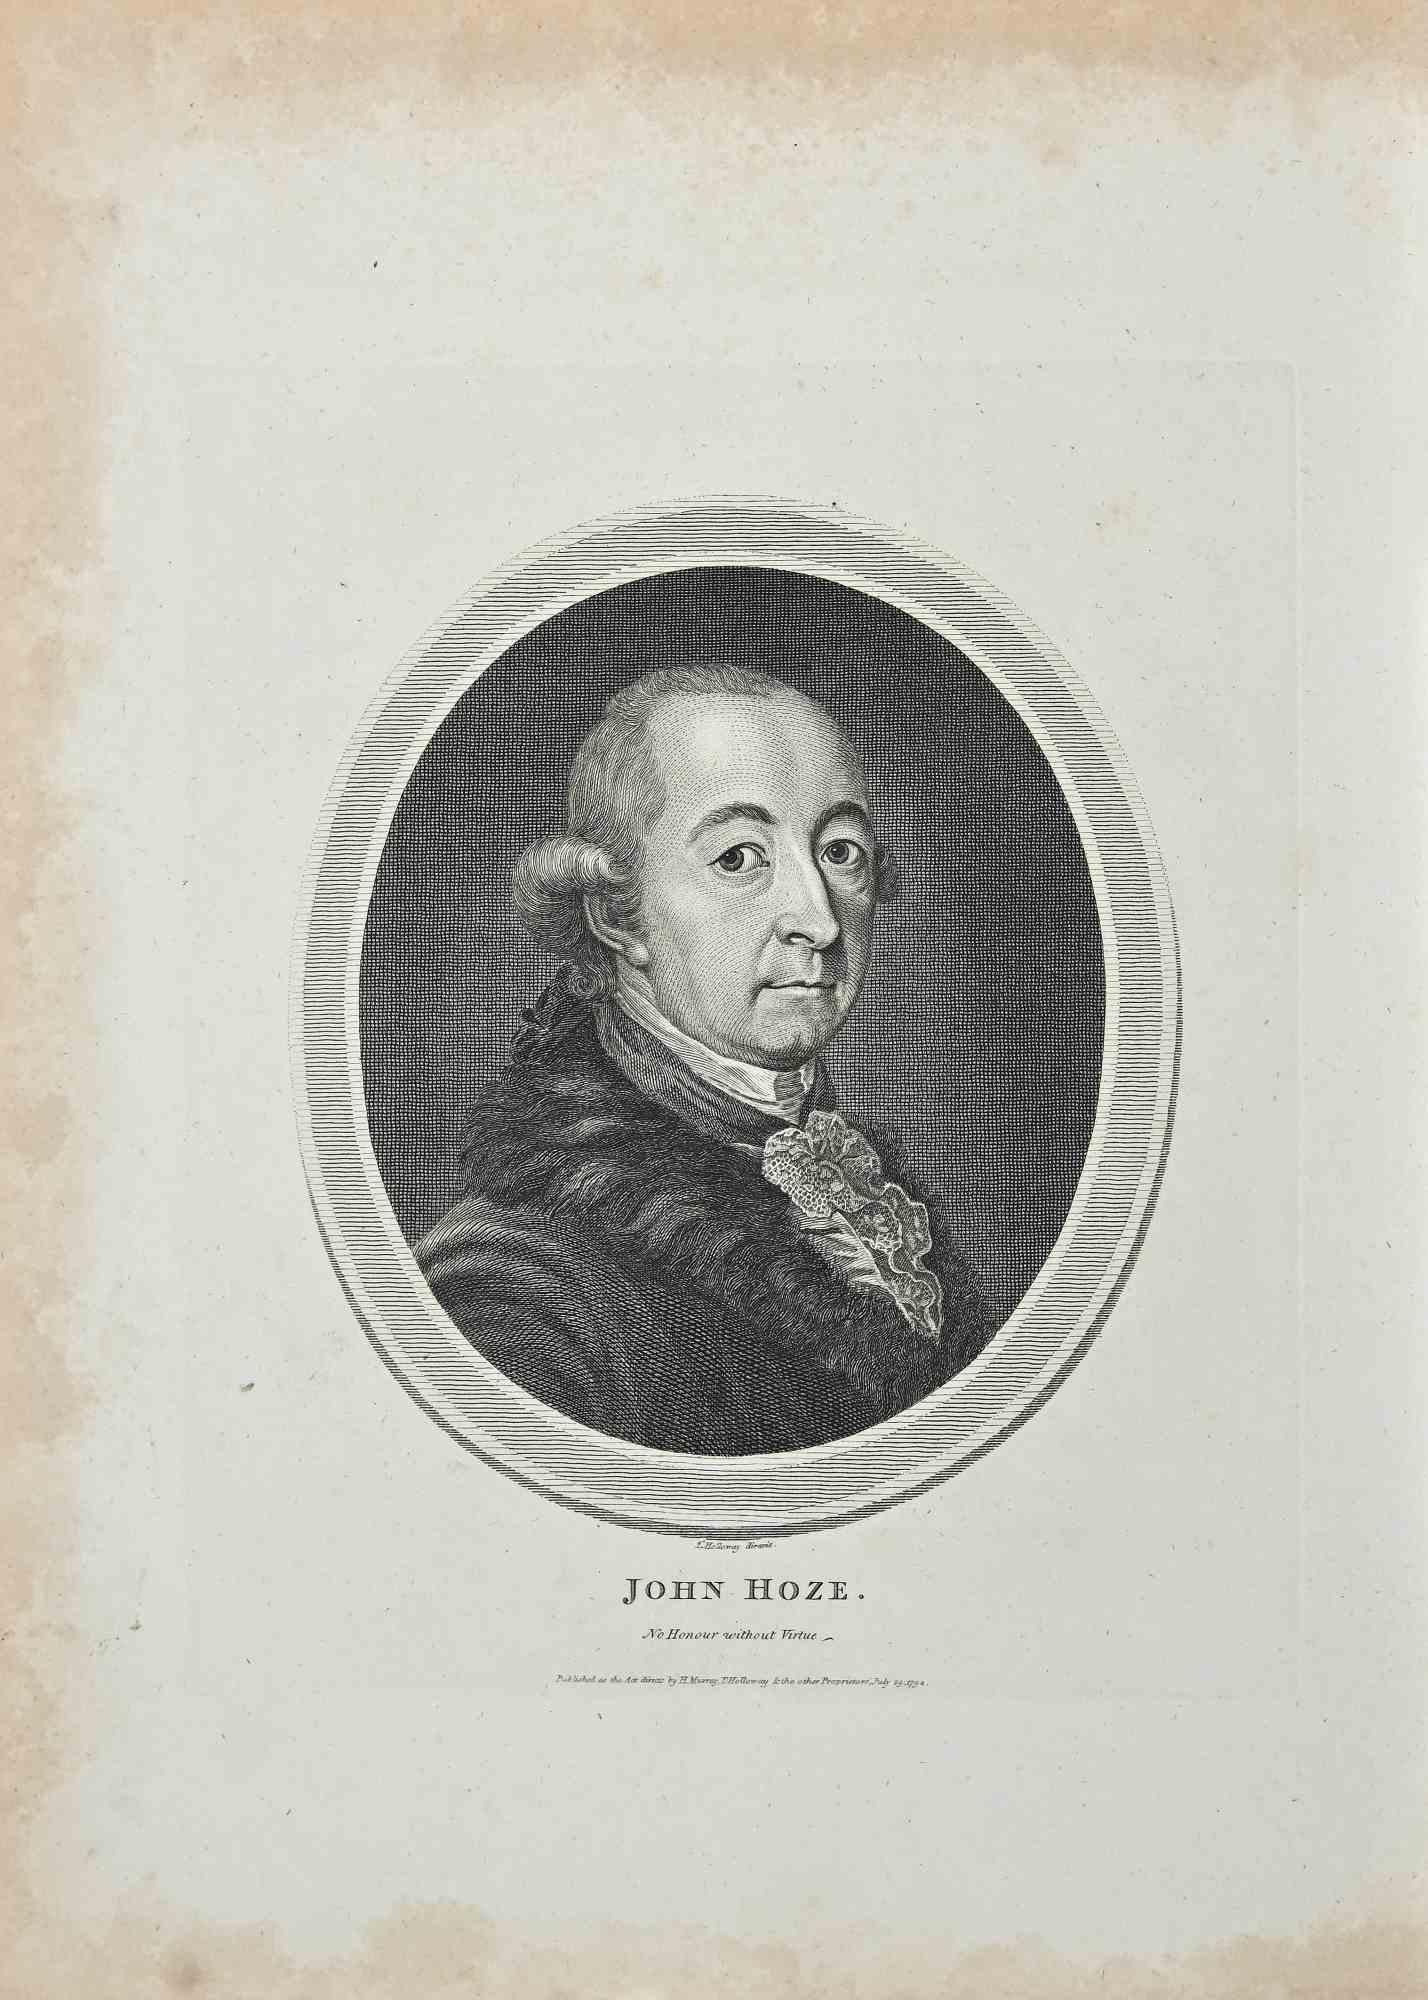 Portrait of John Hoze is an original etching artwork realized by Thomas Holloway for Johann Caspar Lavater's "Essays on Physiognomy, Designed to Promote the Knowledge and the Love of Mankind", London, Bensley, 1810. 

Signed on the plate on the